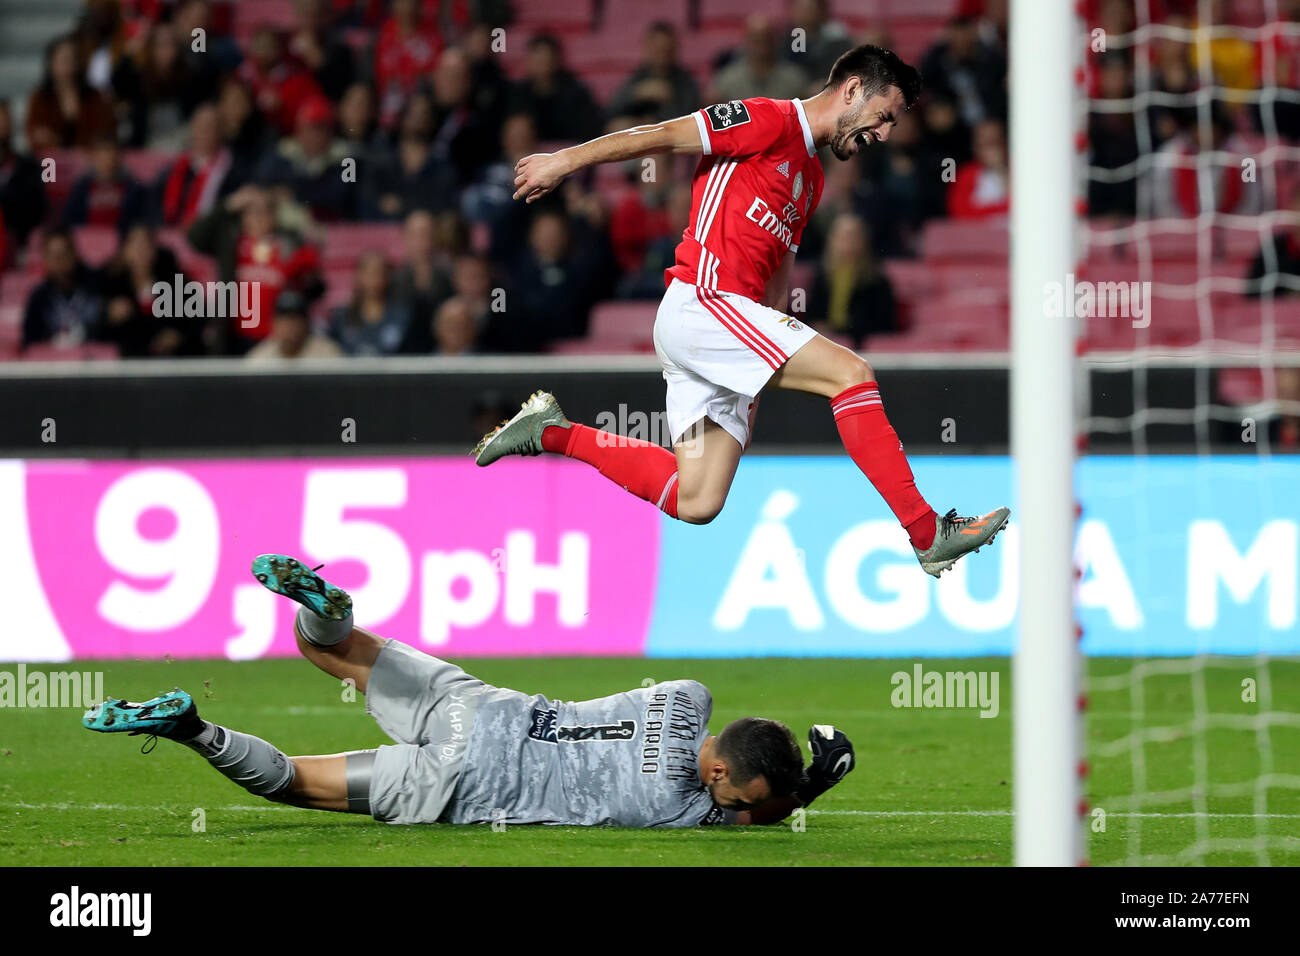 Lisbon, Portugal. 30th Oct, 2019. Pizzi (Top) of Benfica jumps over Portimonense's goalkeeper Ricardo Ferreira during their Portuguese League football match at the Luz stadium in Lisbon, Portugal, on Oct. 30, 2019. Credit: Pedro Fiuza/Xinhua/Alamy Live News Stock Photo